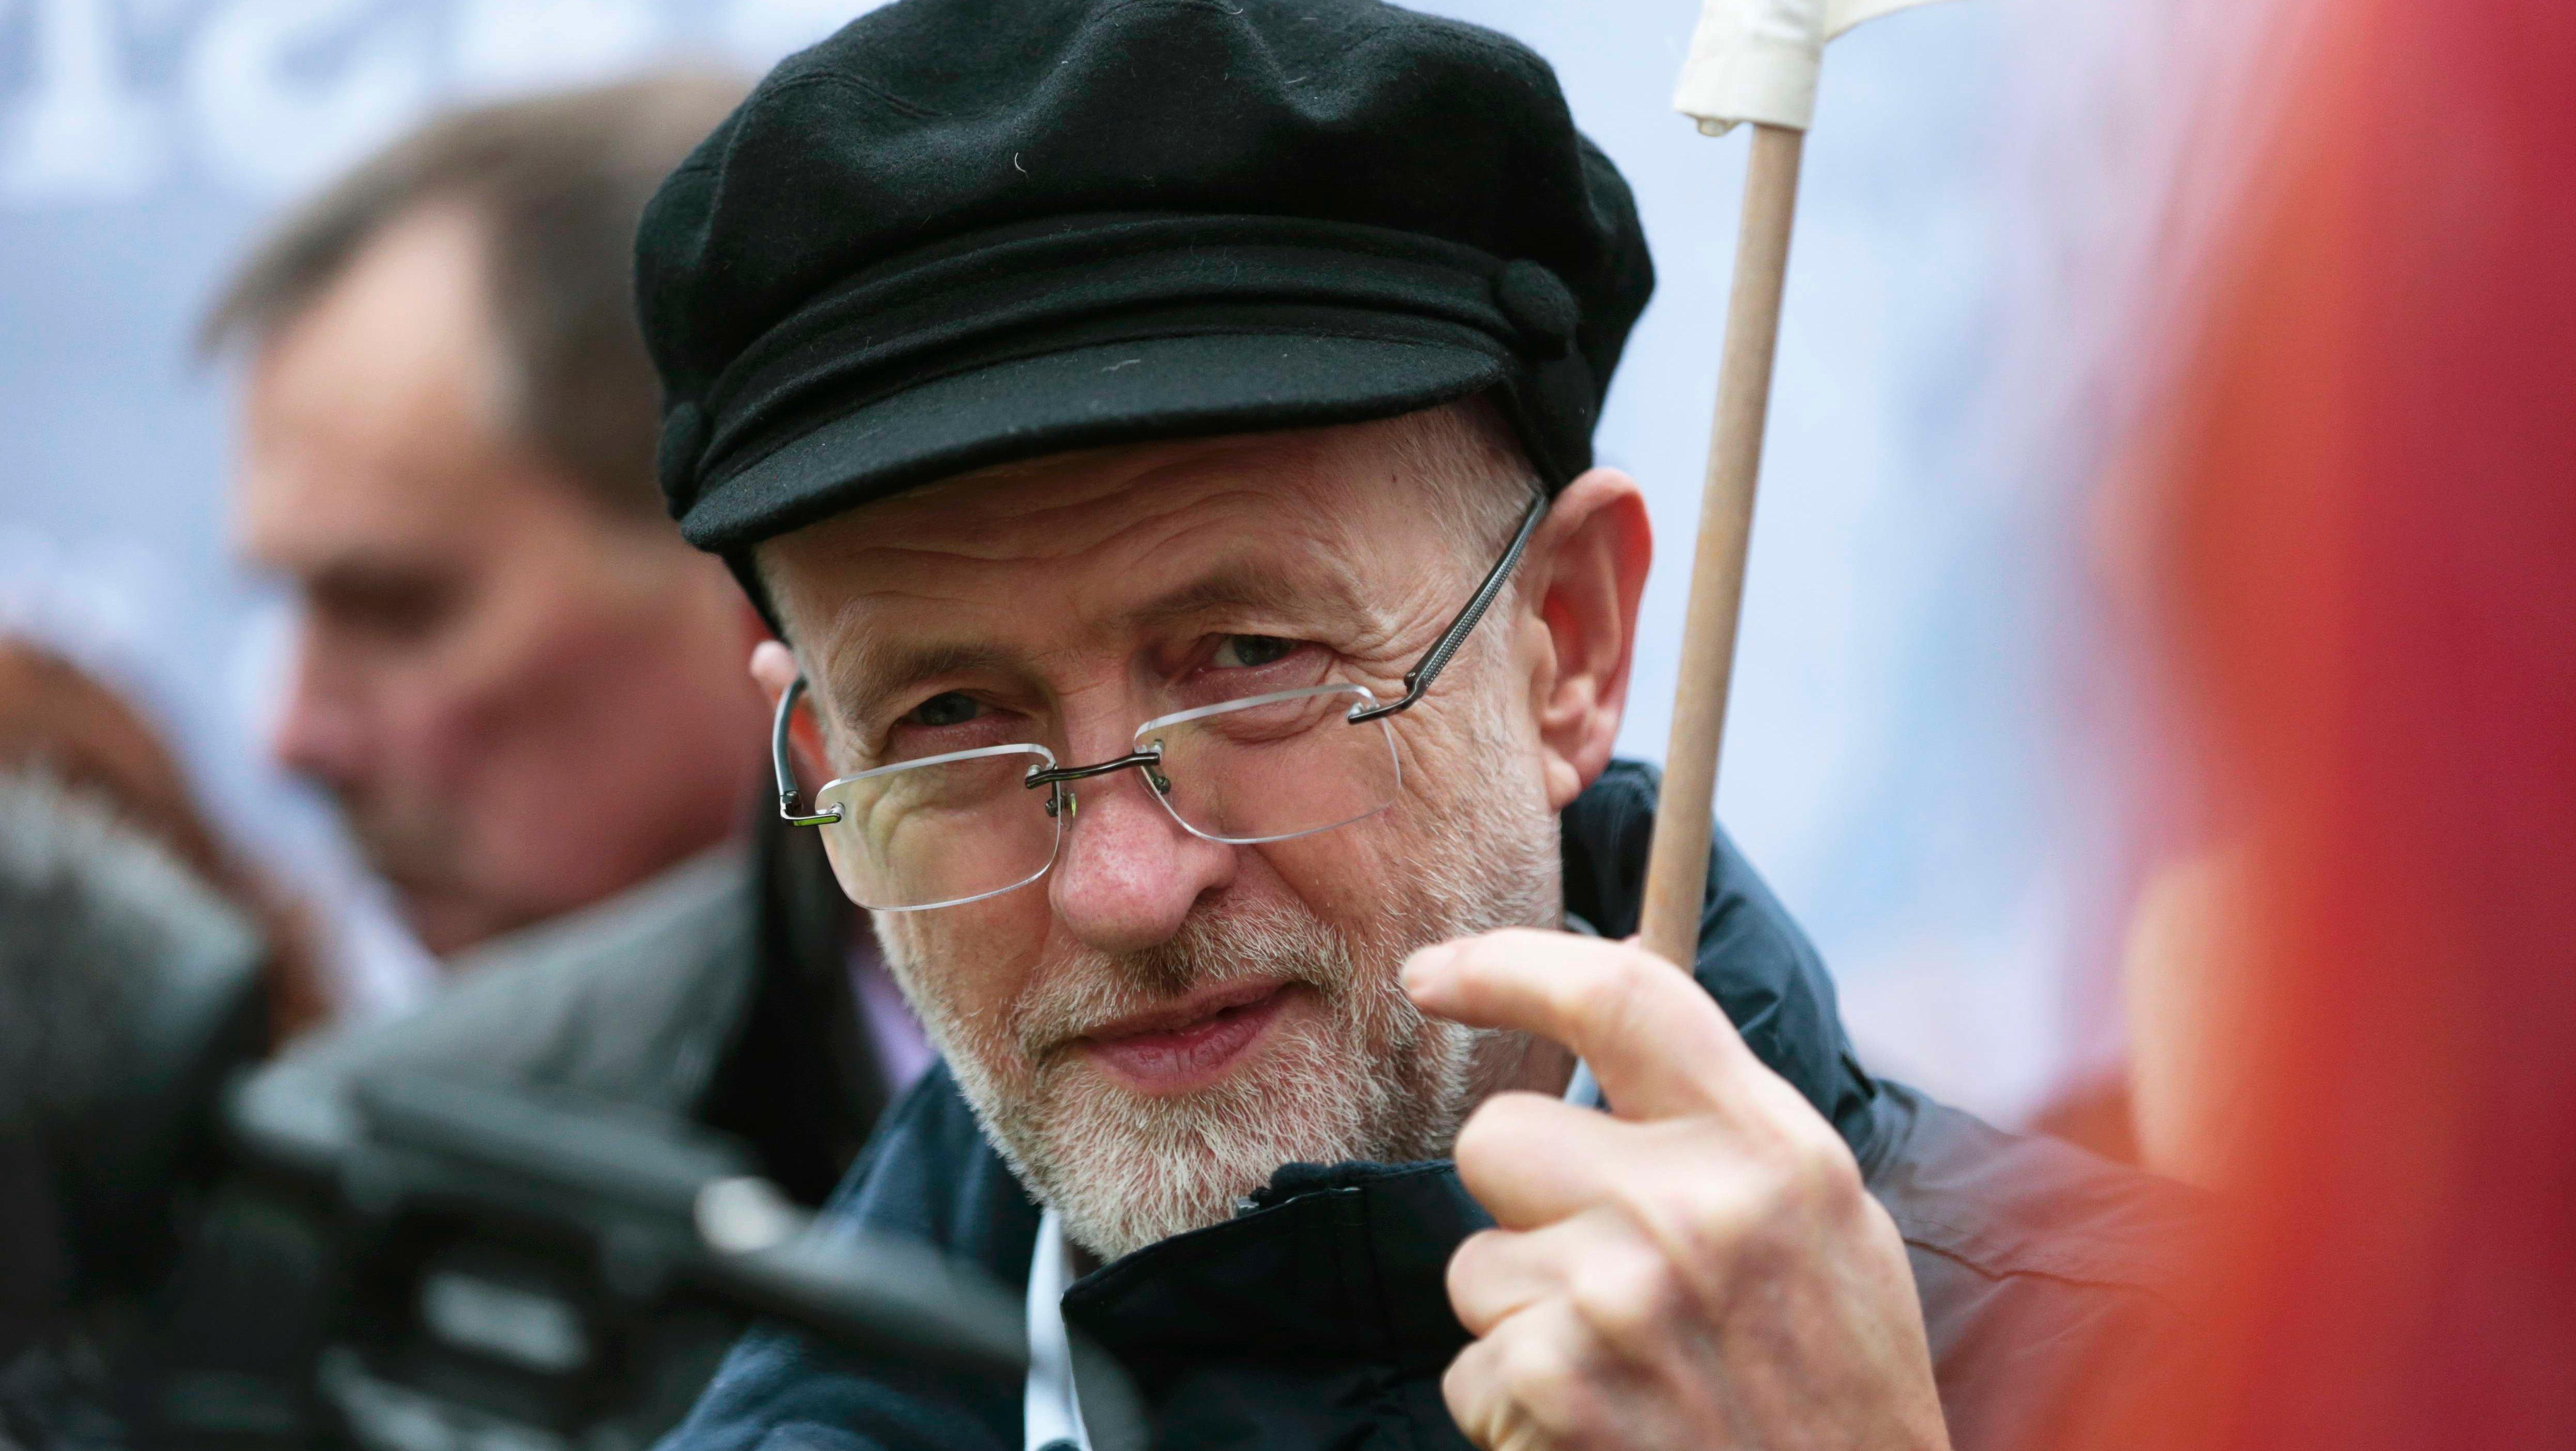 Britain's leader of the opposition Labour Party, Jeremy Corbyn